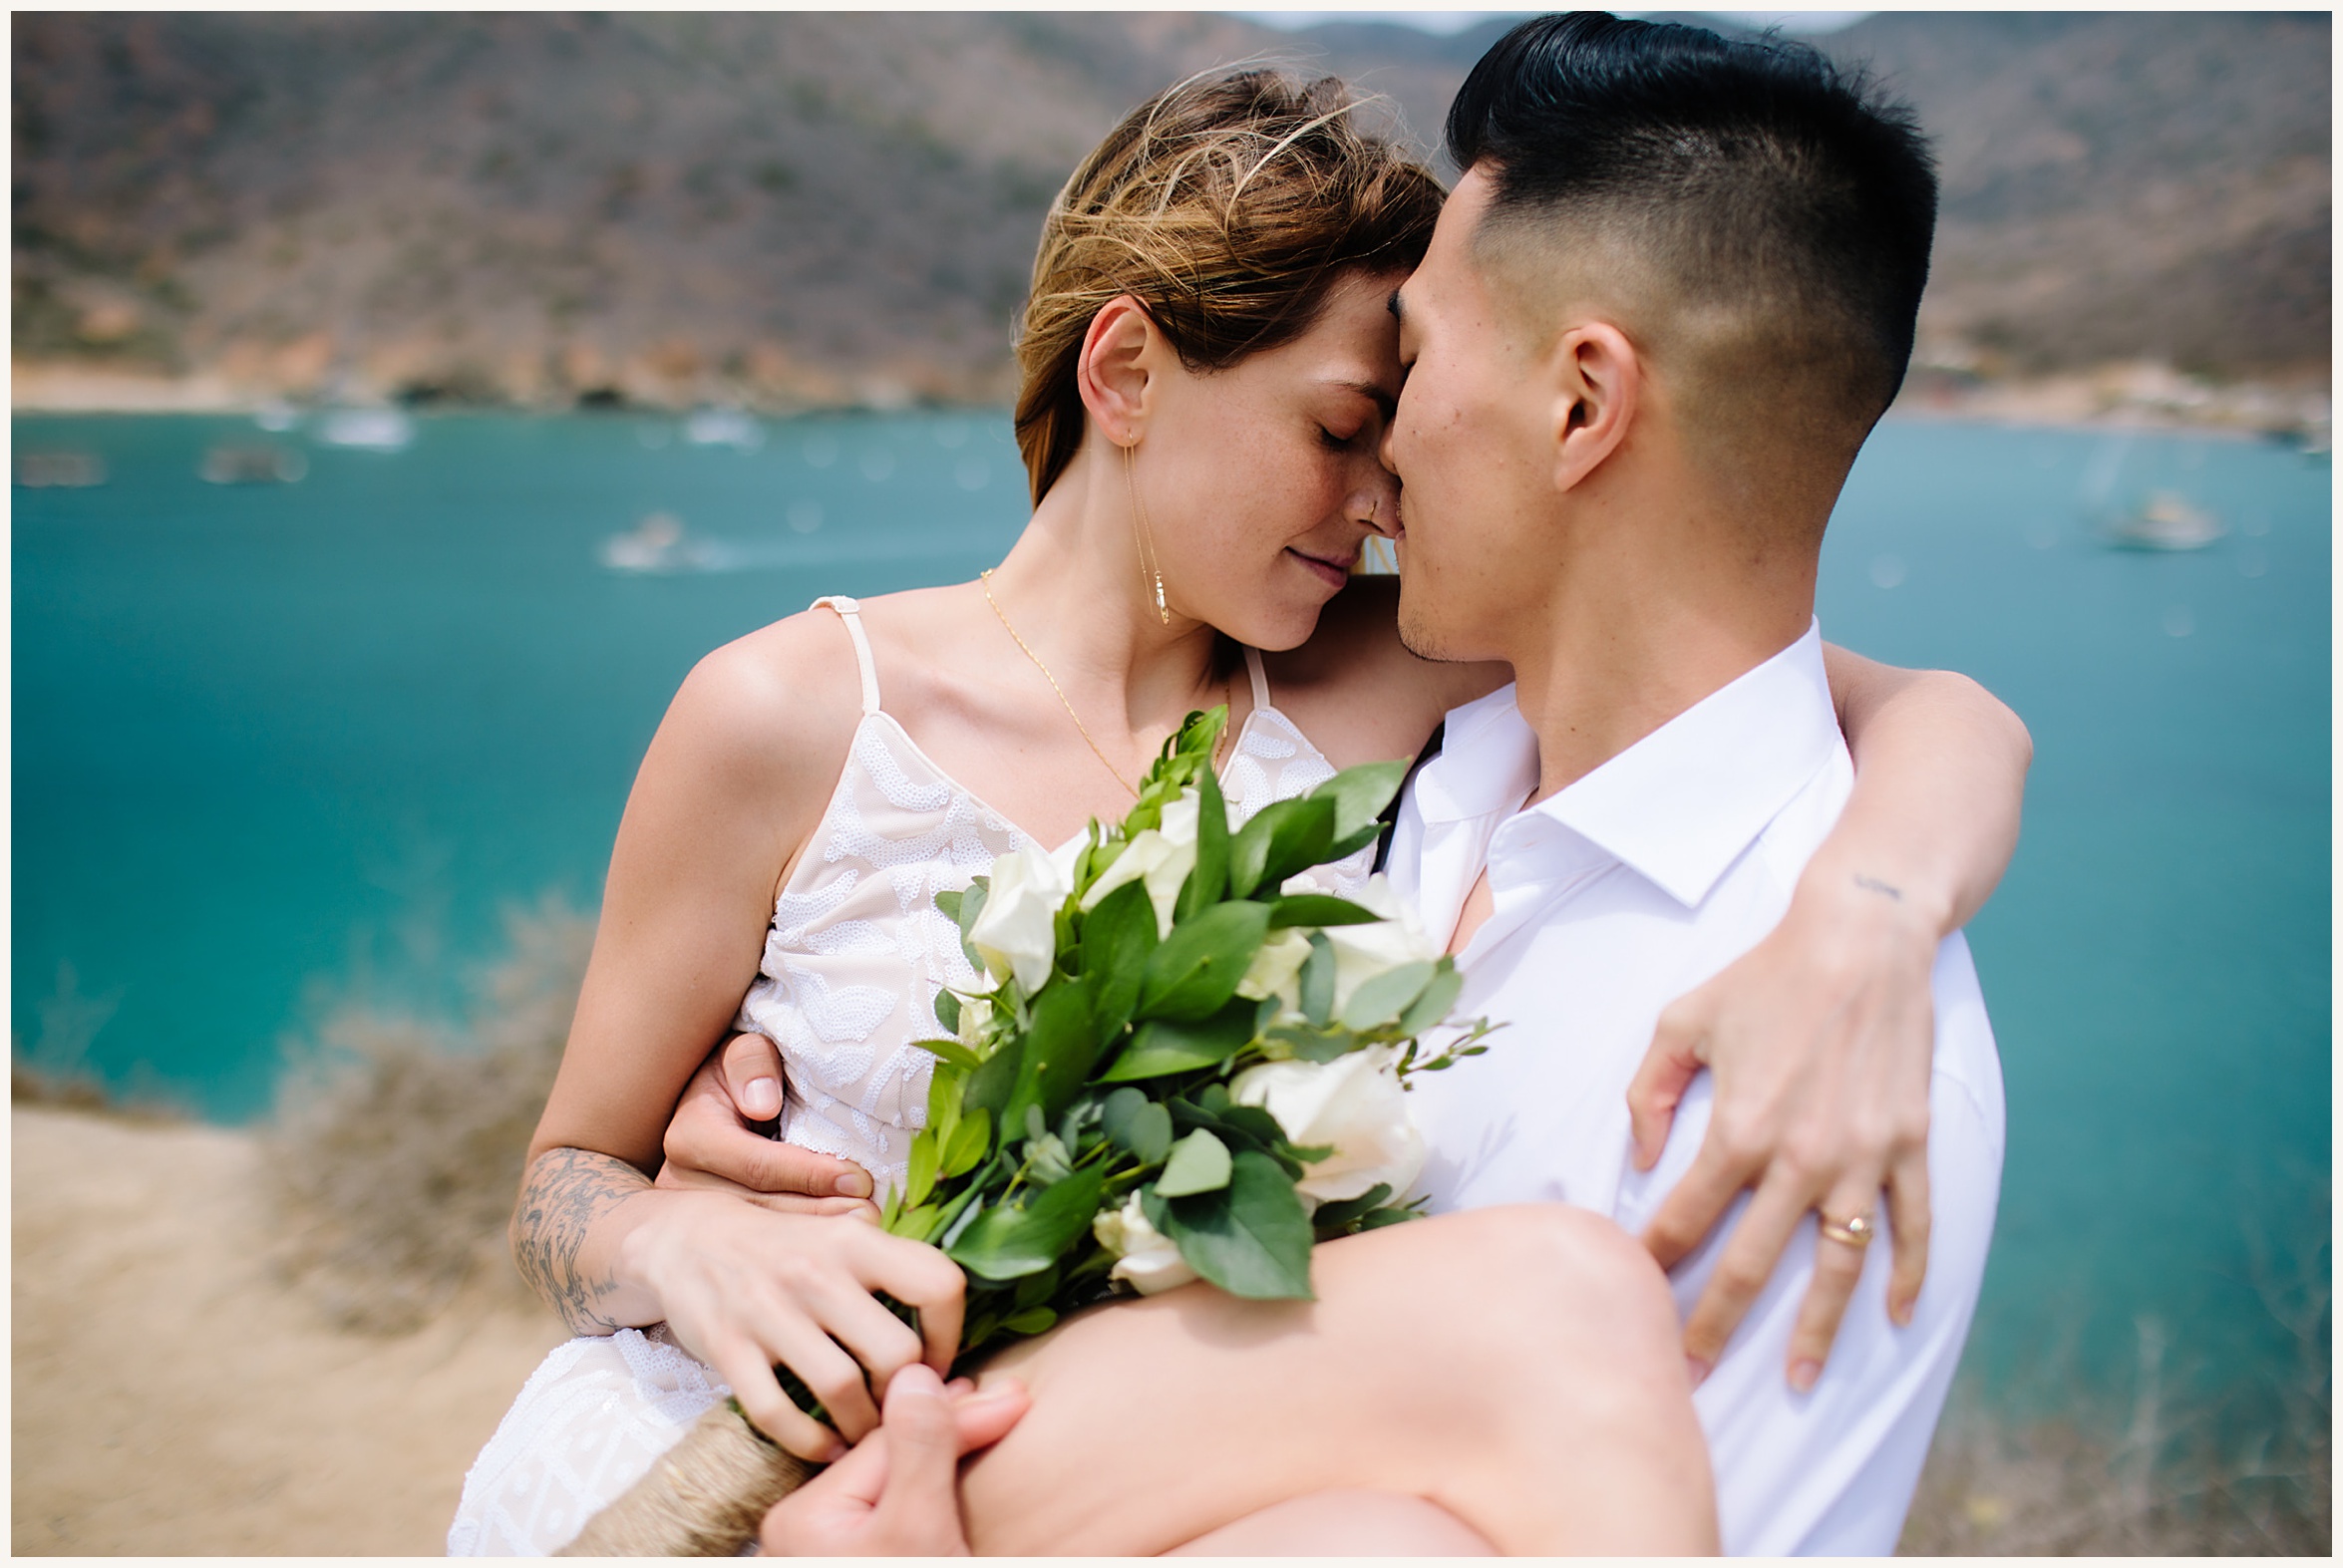 Photo of bride and groom with backdrop of cliffside view